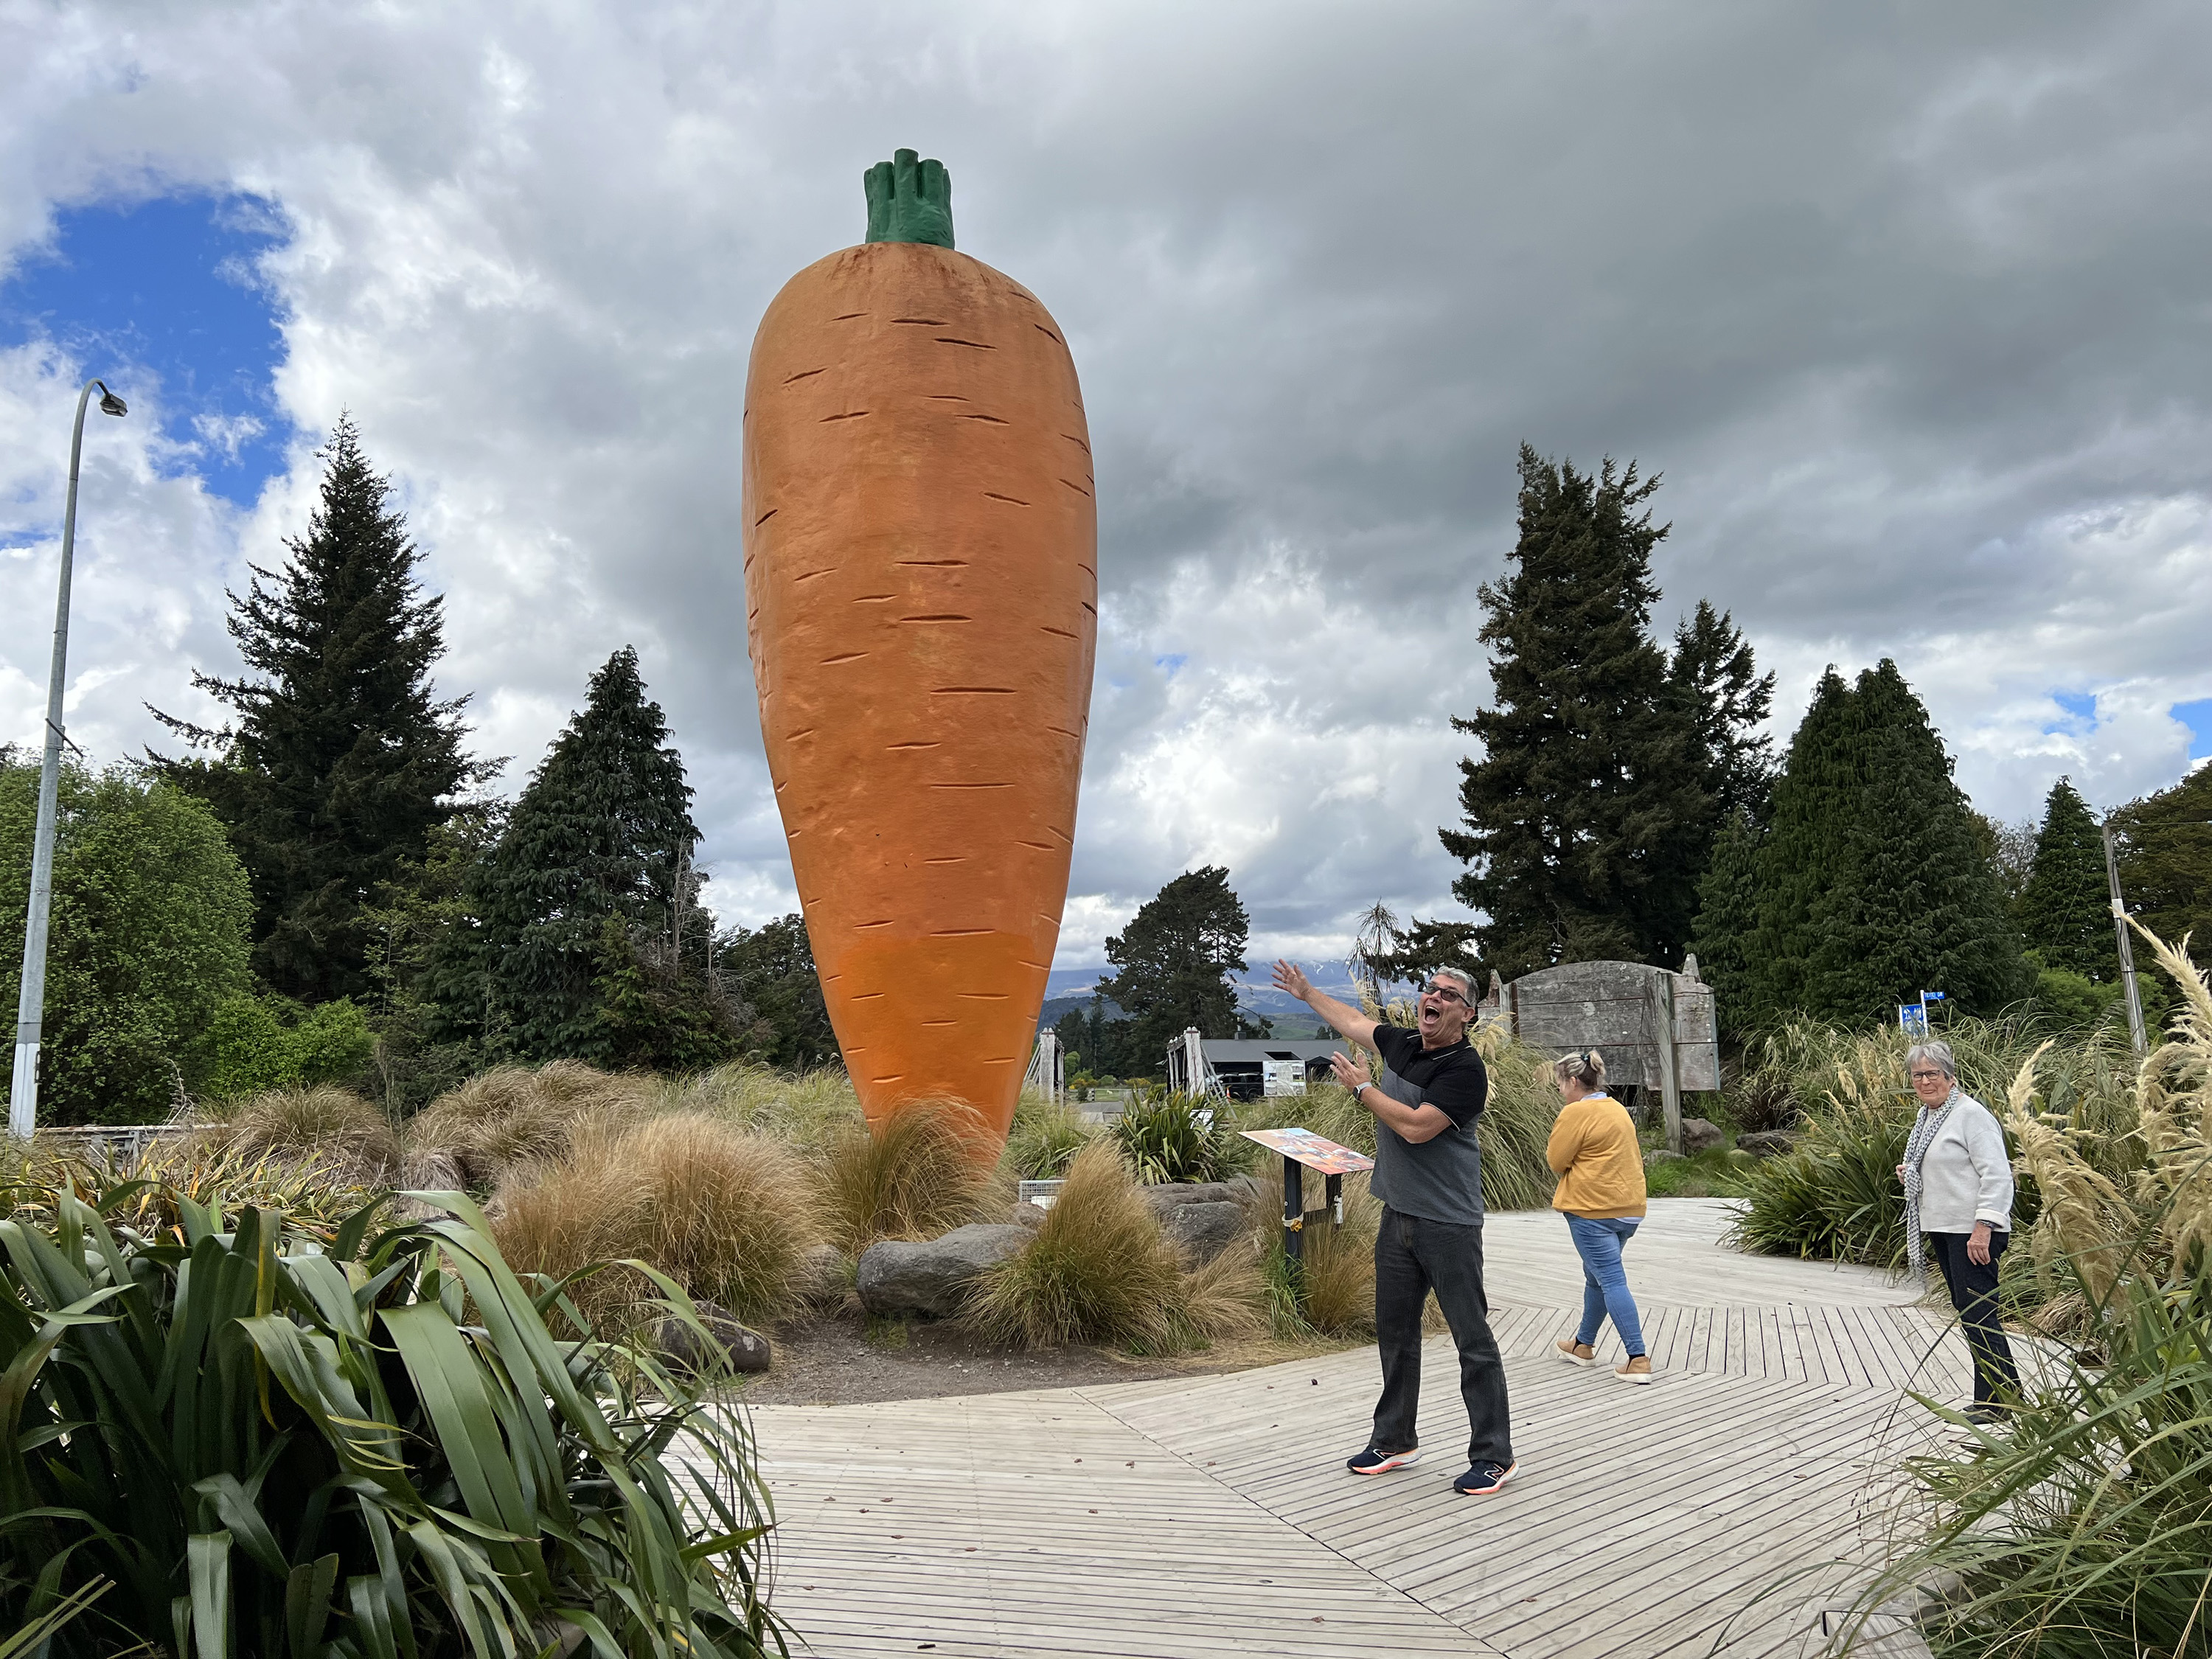 Mark Hockley of Great Journeys shows off a massive carrot sculpture, the centerpiece of Ohakune Carrot Adventure Park in Okahune.